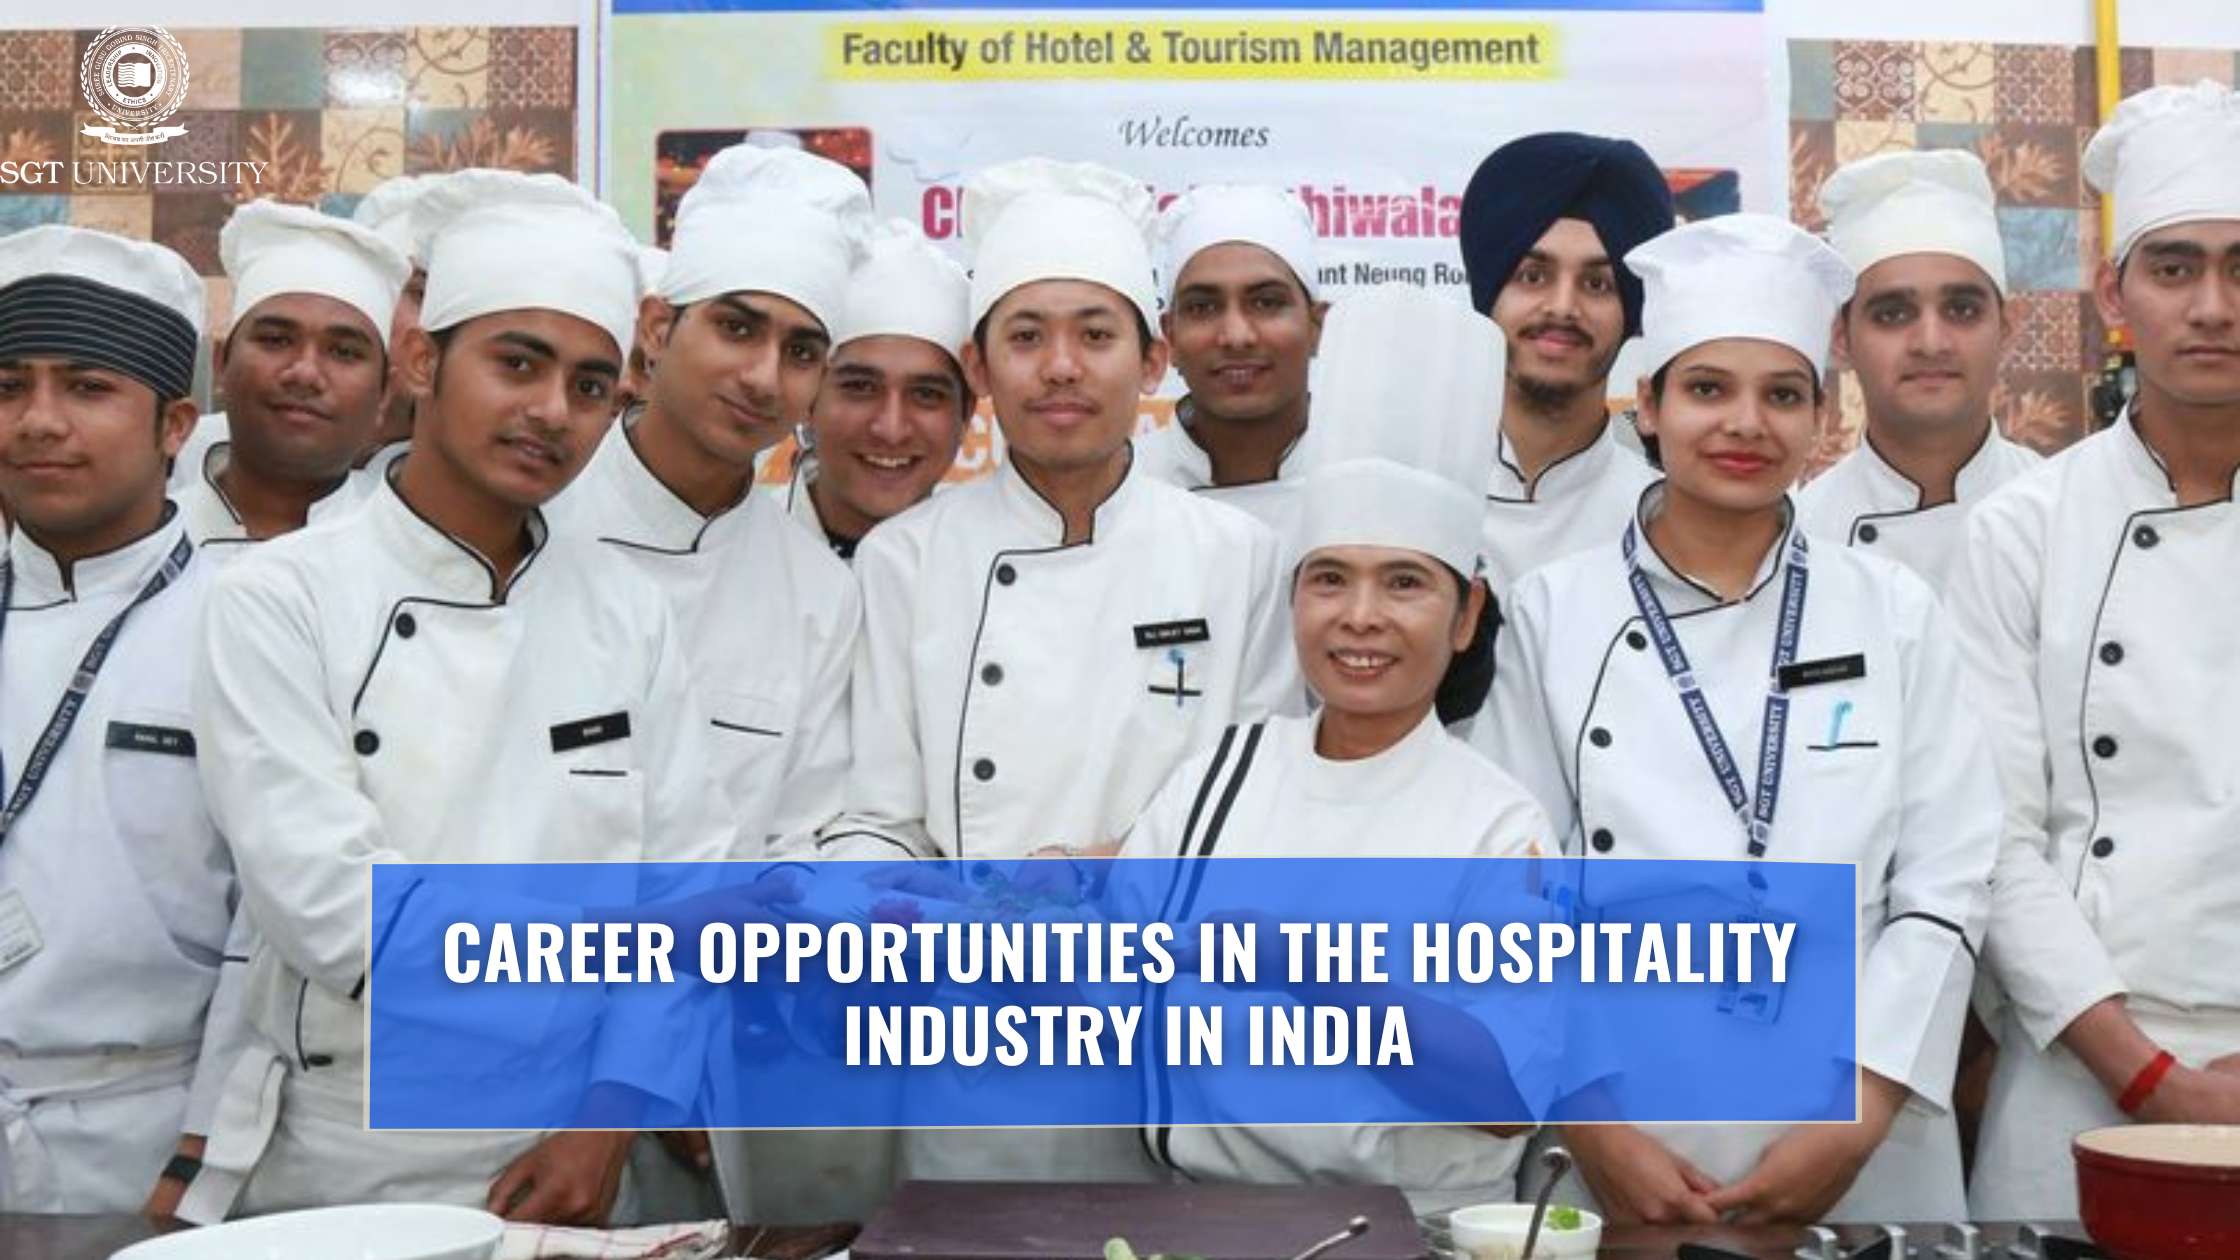 You are currently viewing Career Opportunities in the Hospitality Industry in India – SGT University